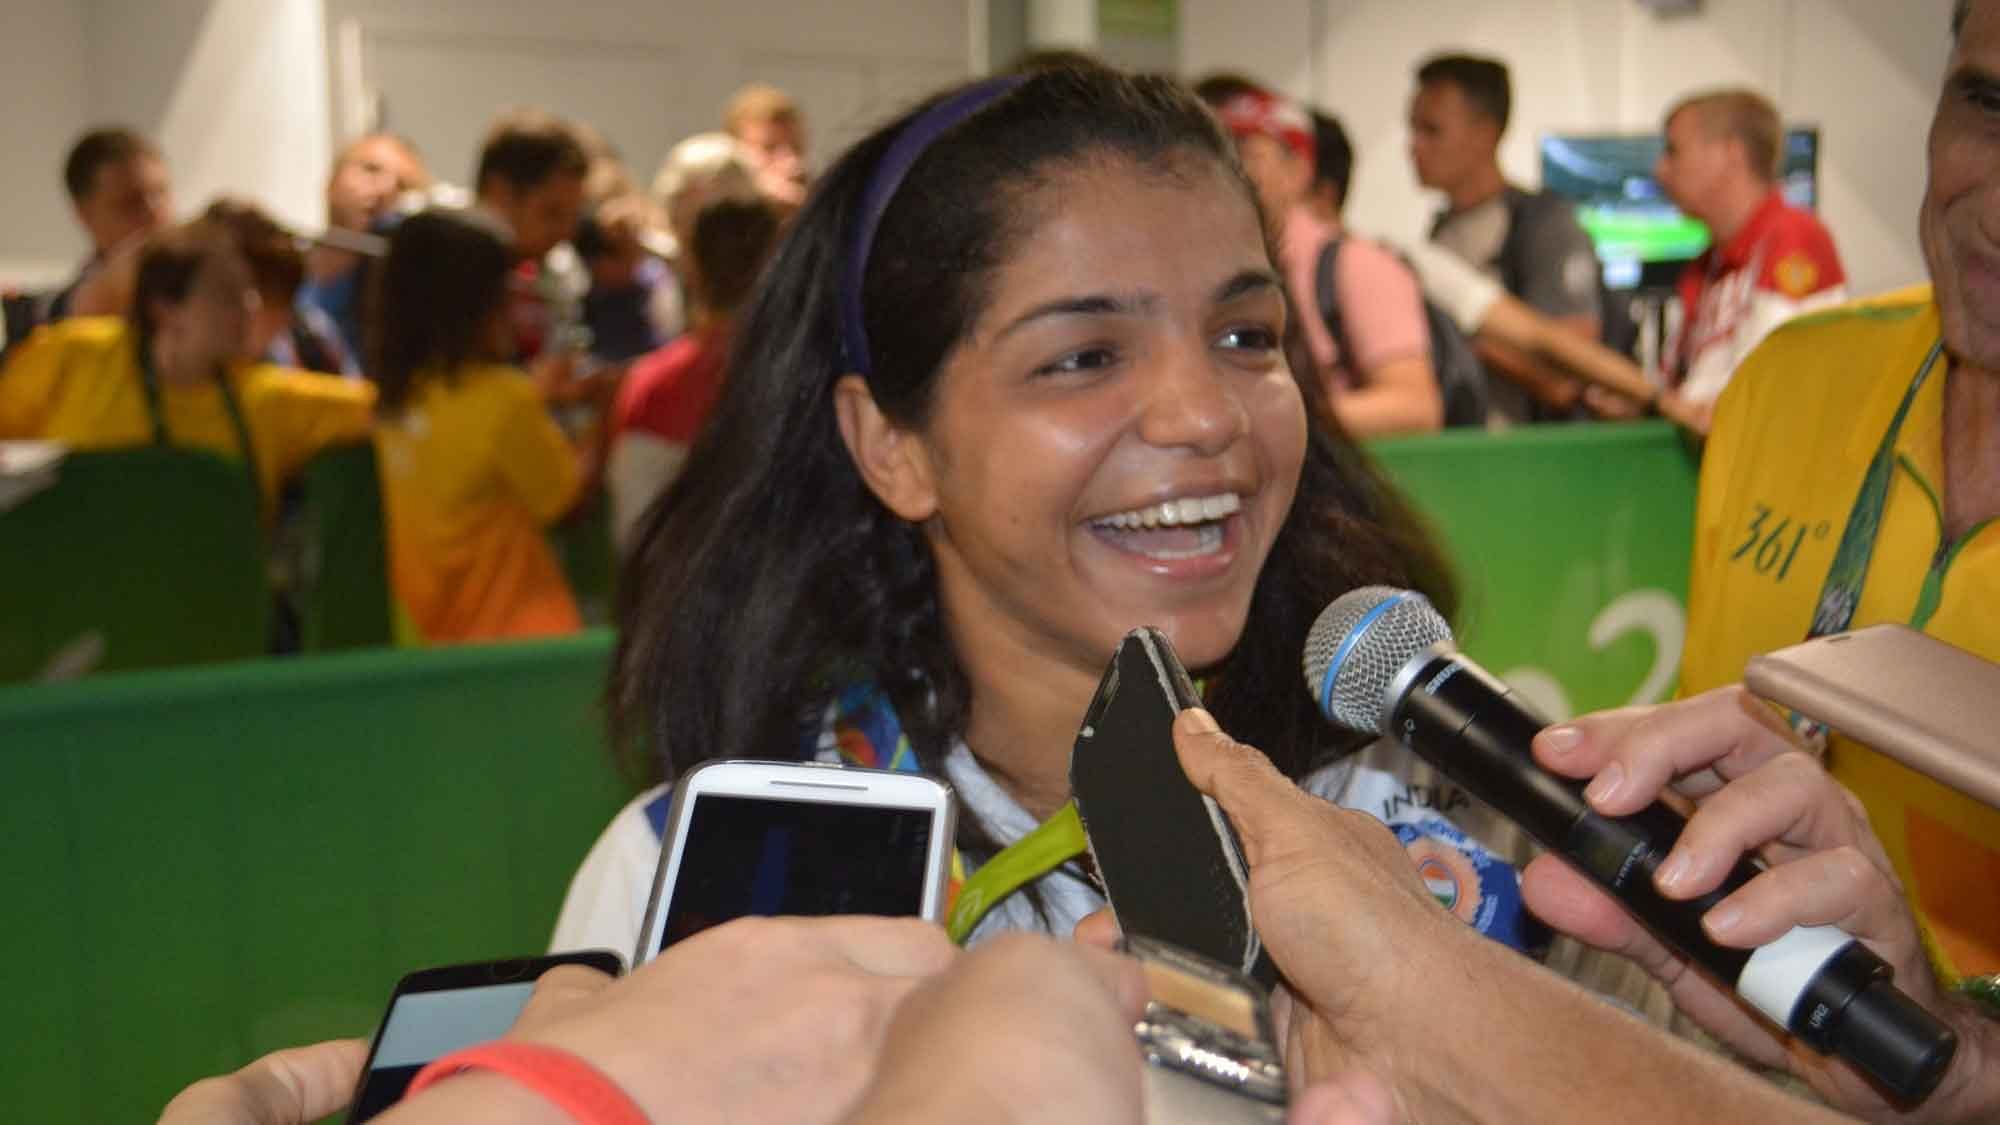 Bringing home India’s 25th Olympic medal and first women’s wrestling medal, Sakshi ended the country’s painful wait. (Photo: AP)